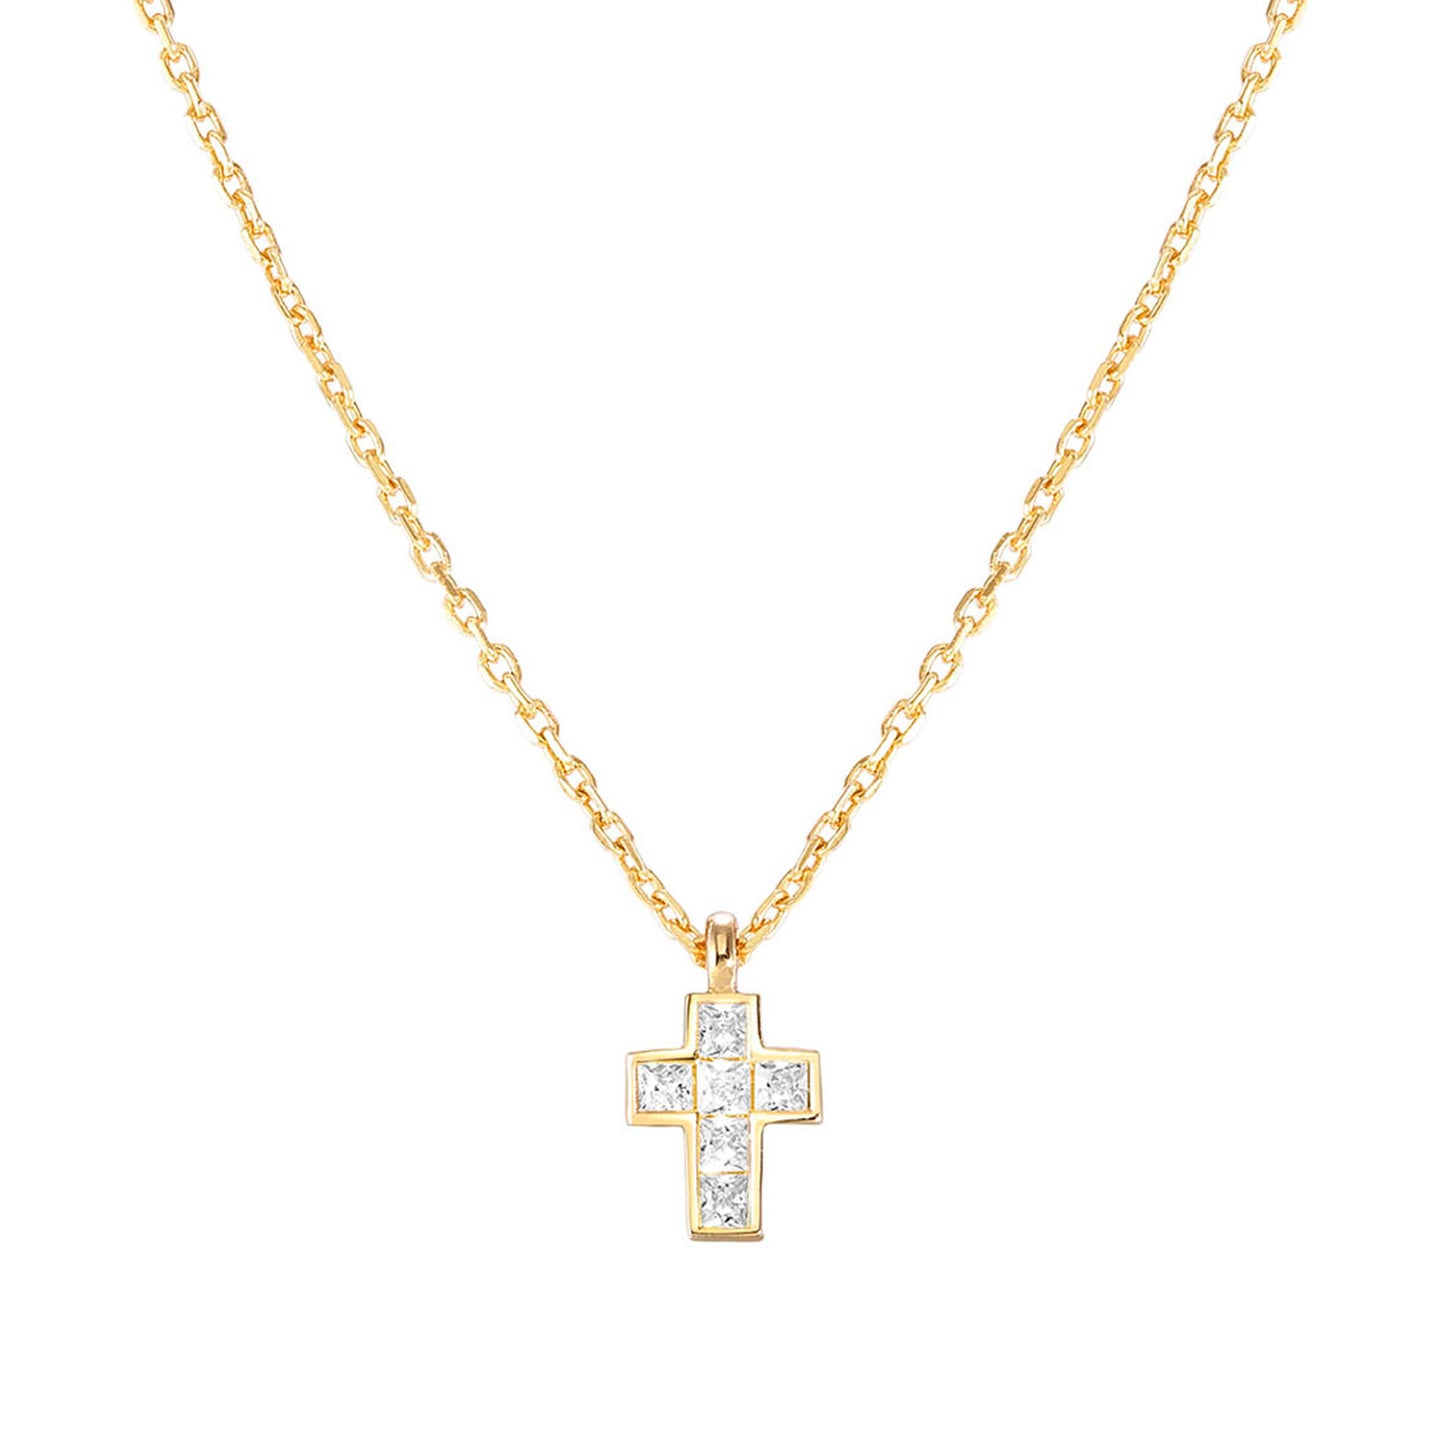 240912/001 CARISMATICA Sterling Silver & 18ct YGP Cubic ZIRCONIA SET Cross Necklace (SMALL CROSS) (001_WHITE)